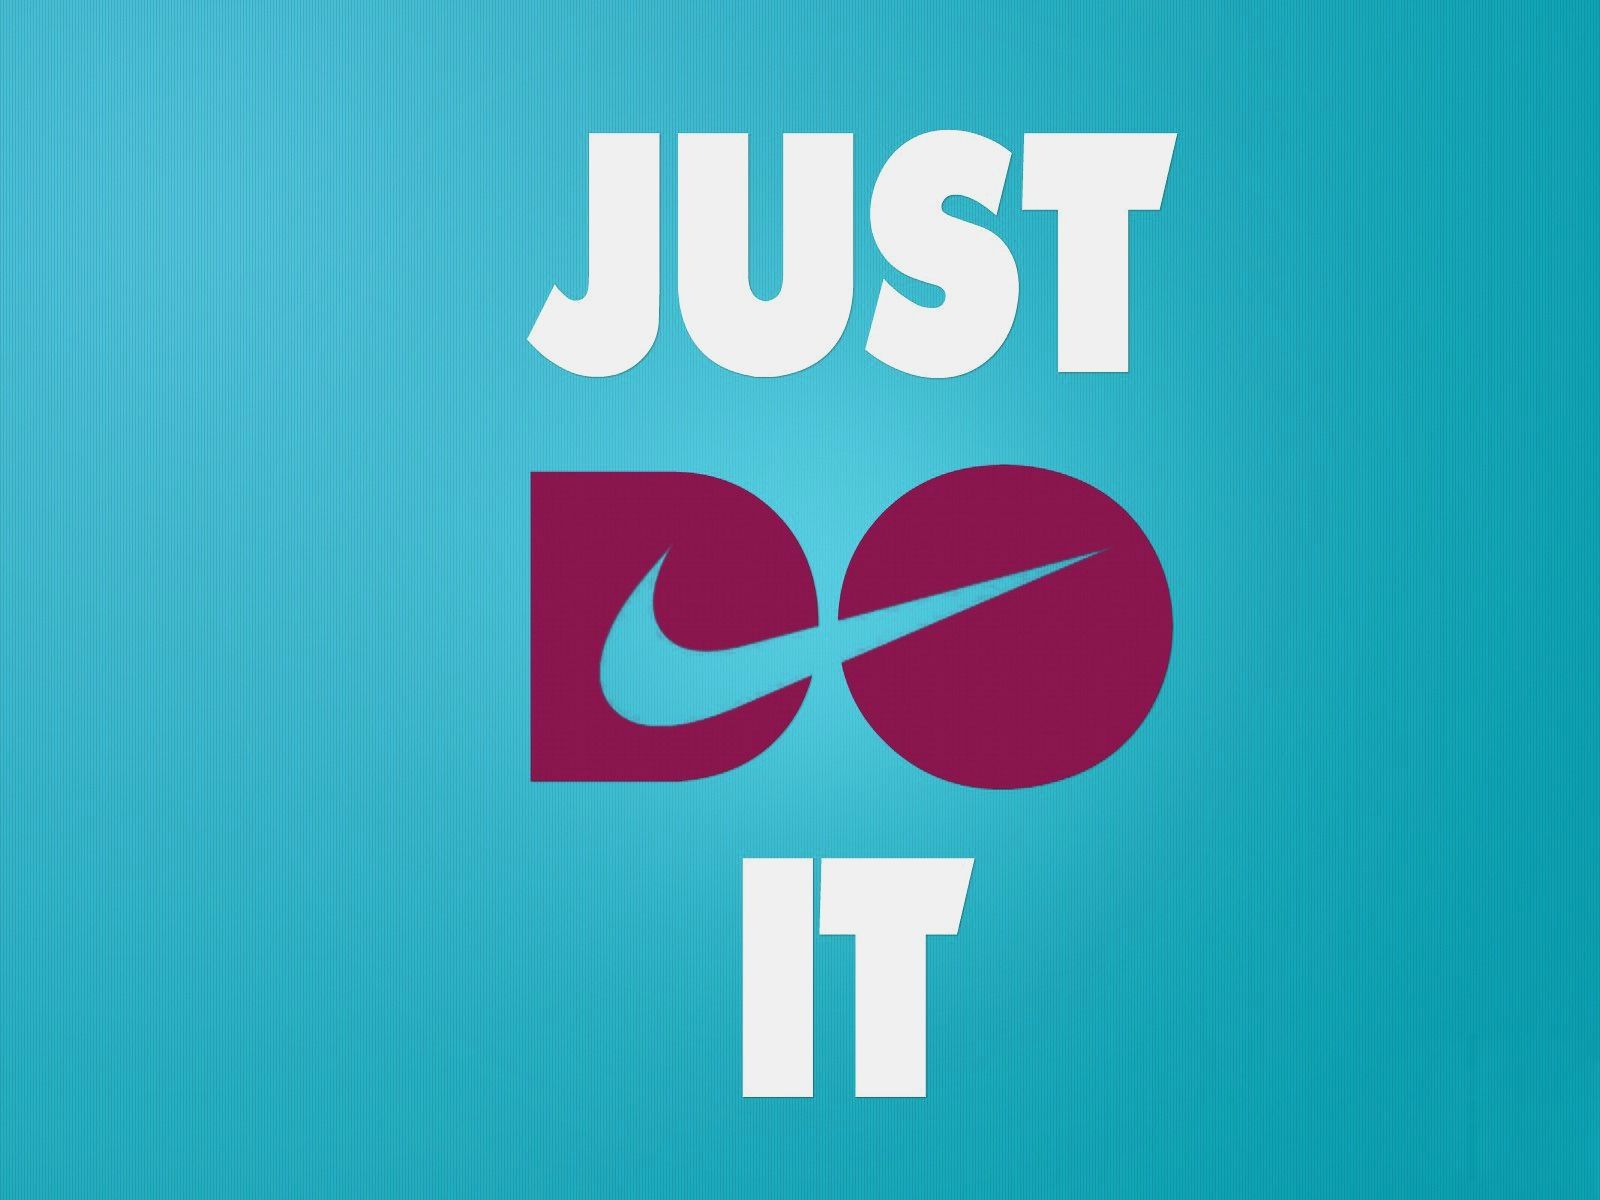 Pink Nike Quotes Wallpapers on WallpaperDog